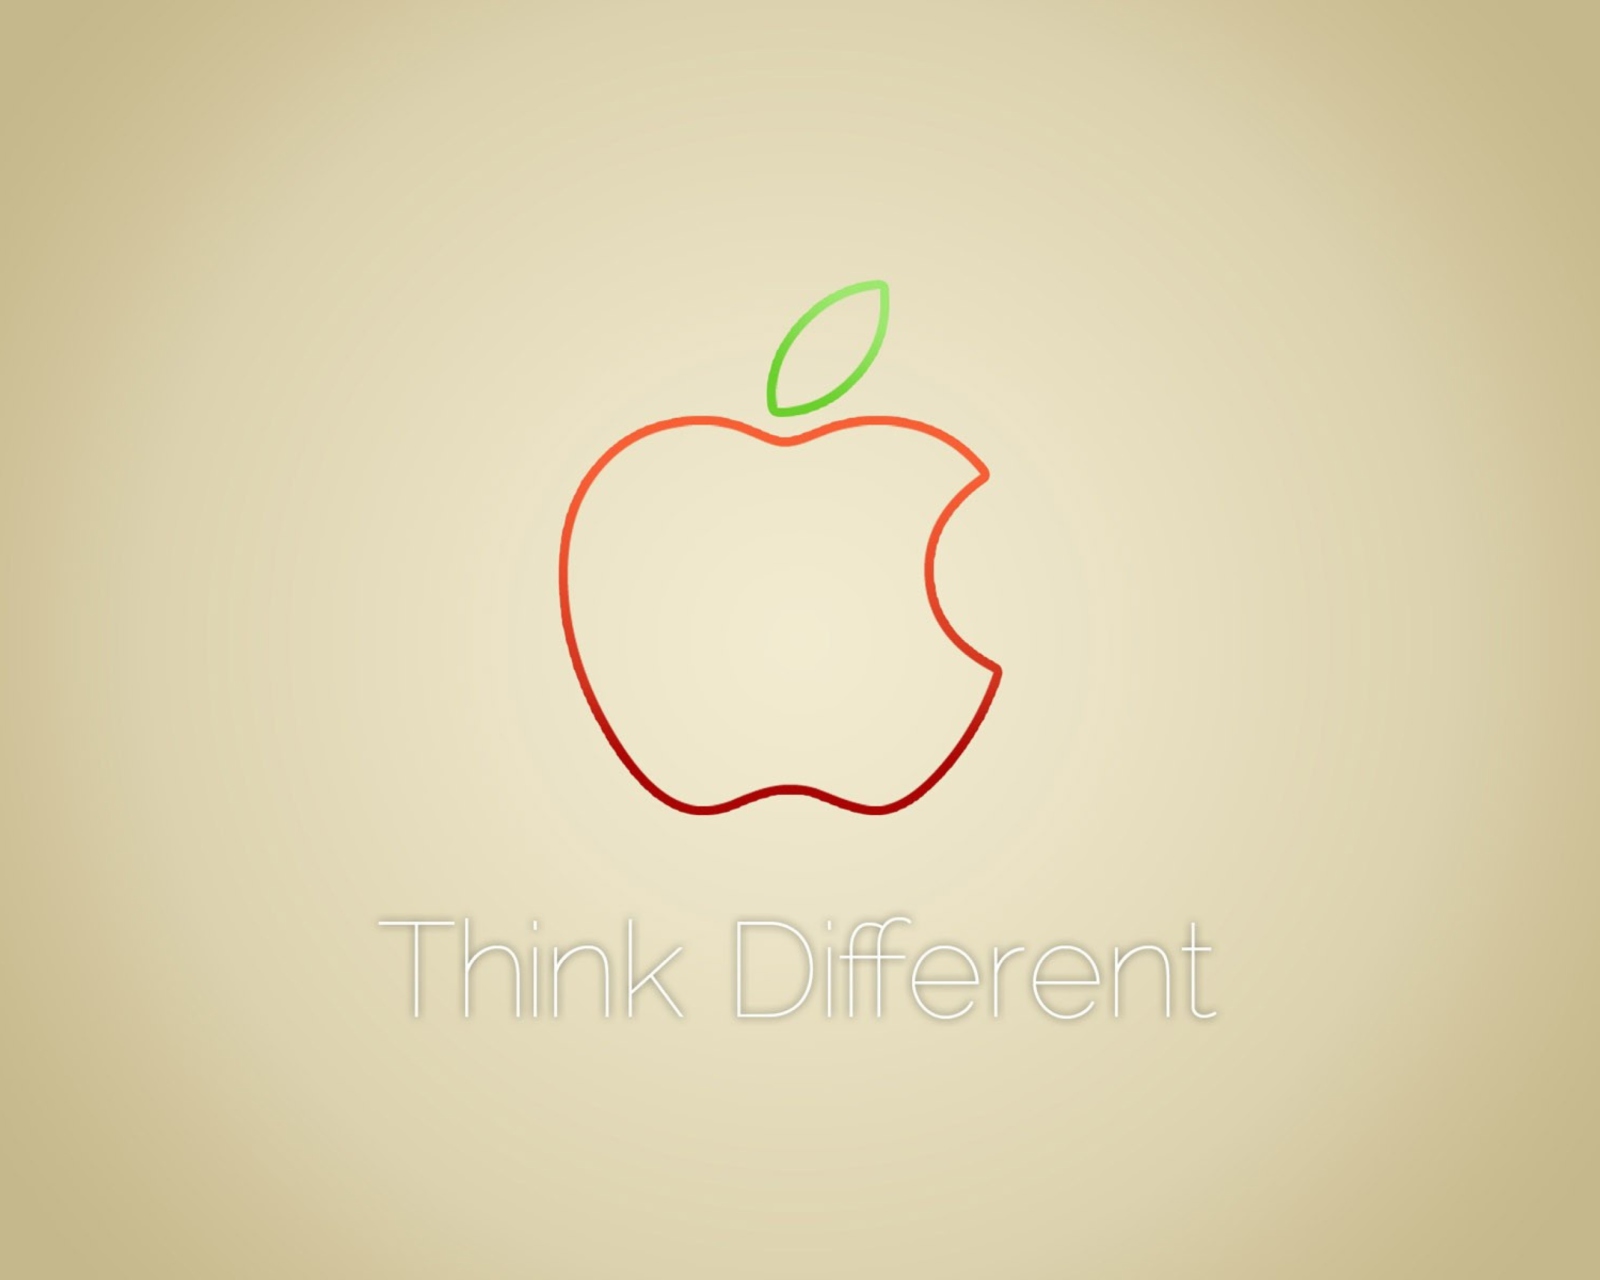 Think Different wallpaper 1600x1280